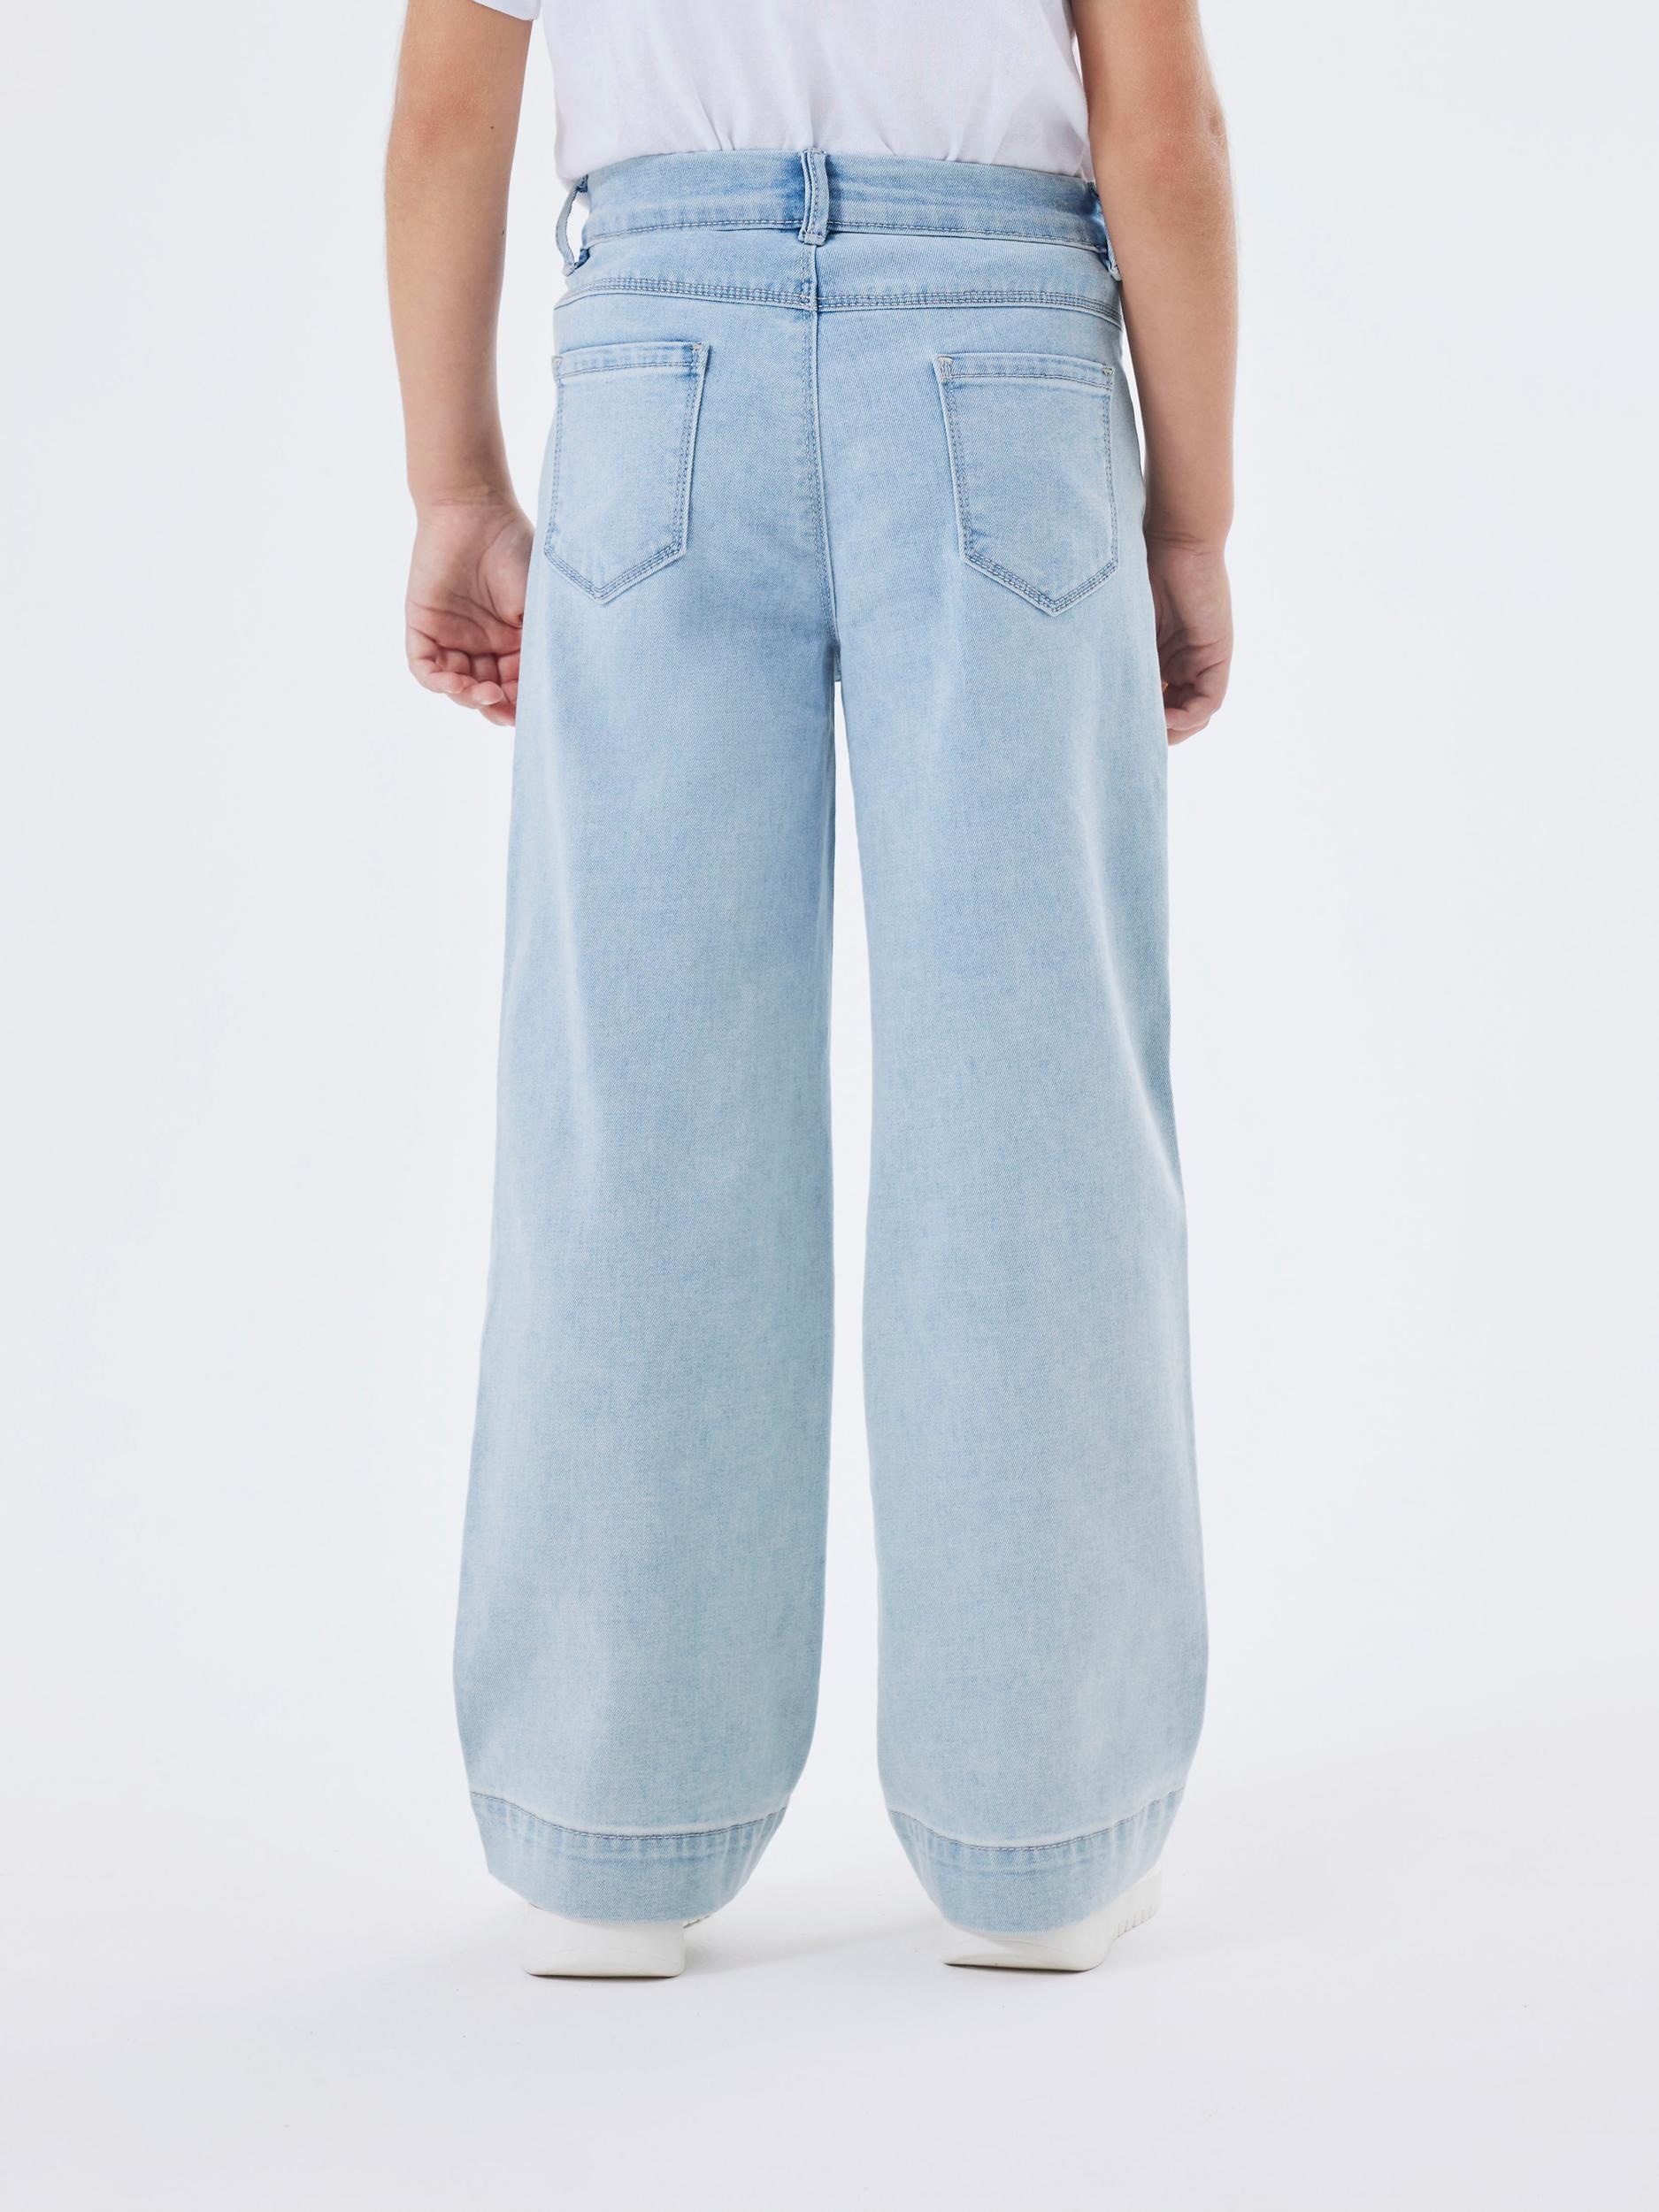 Weite Jeans 1356-ON It NOOS« bei JEANS Name WIDE HW OTTO »NKFROSE